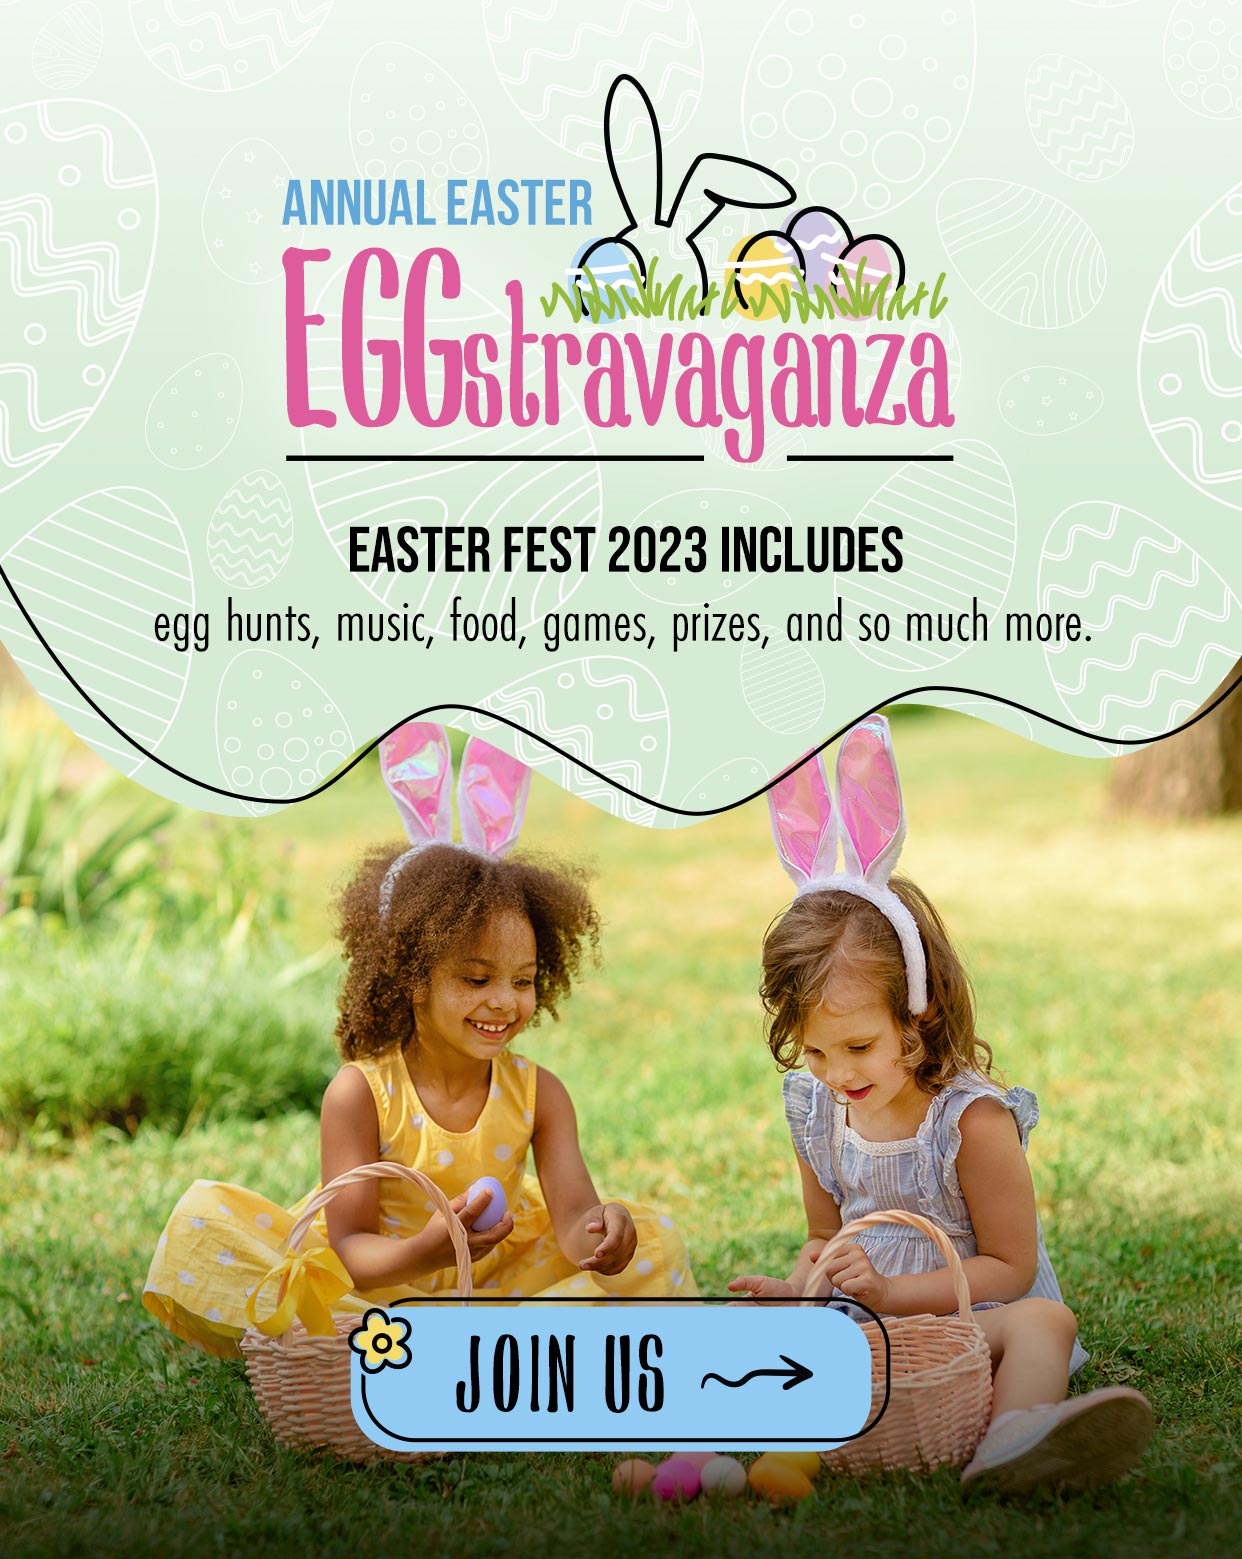 Annual Easter Eggstravaganza egg hunts, music, food, games, prizes, and so much more.